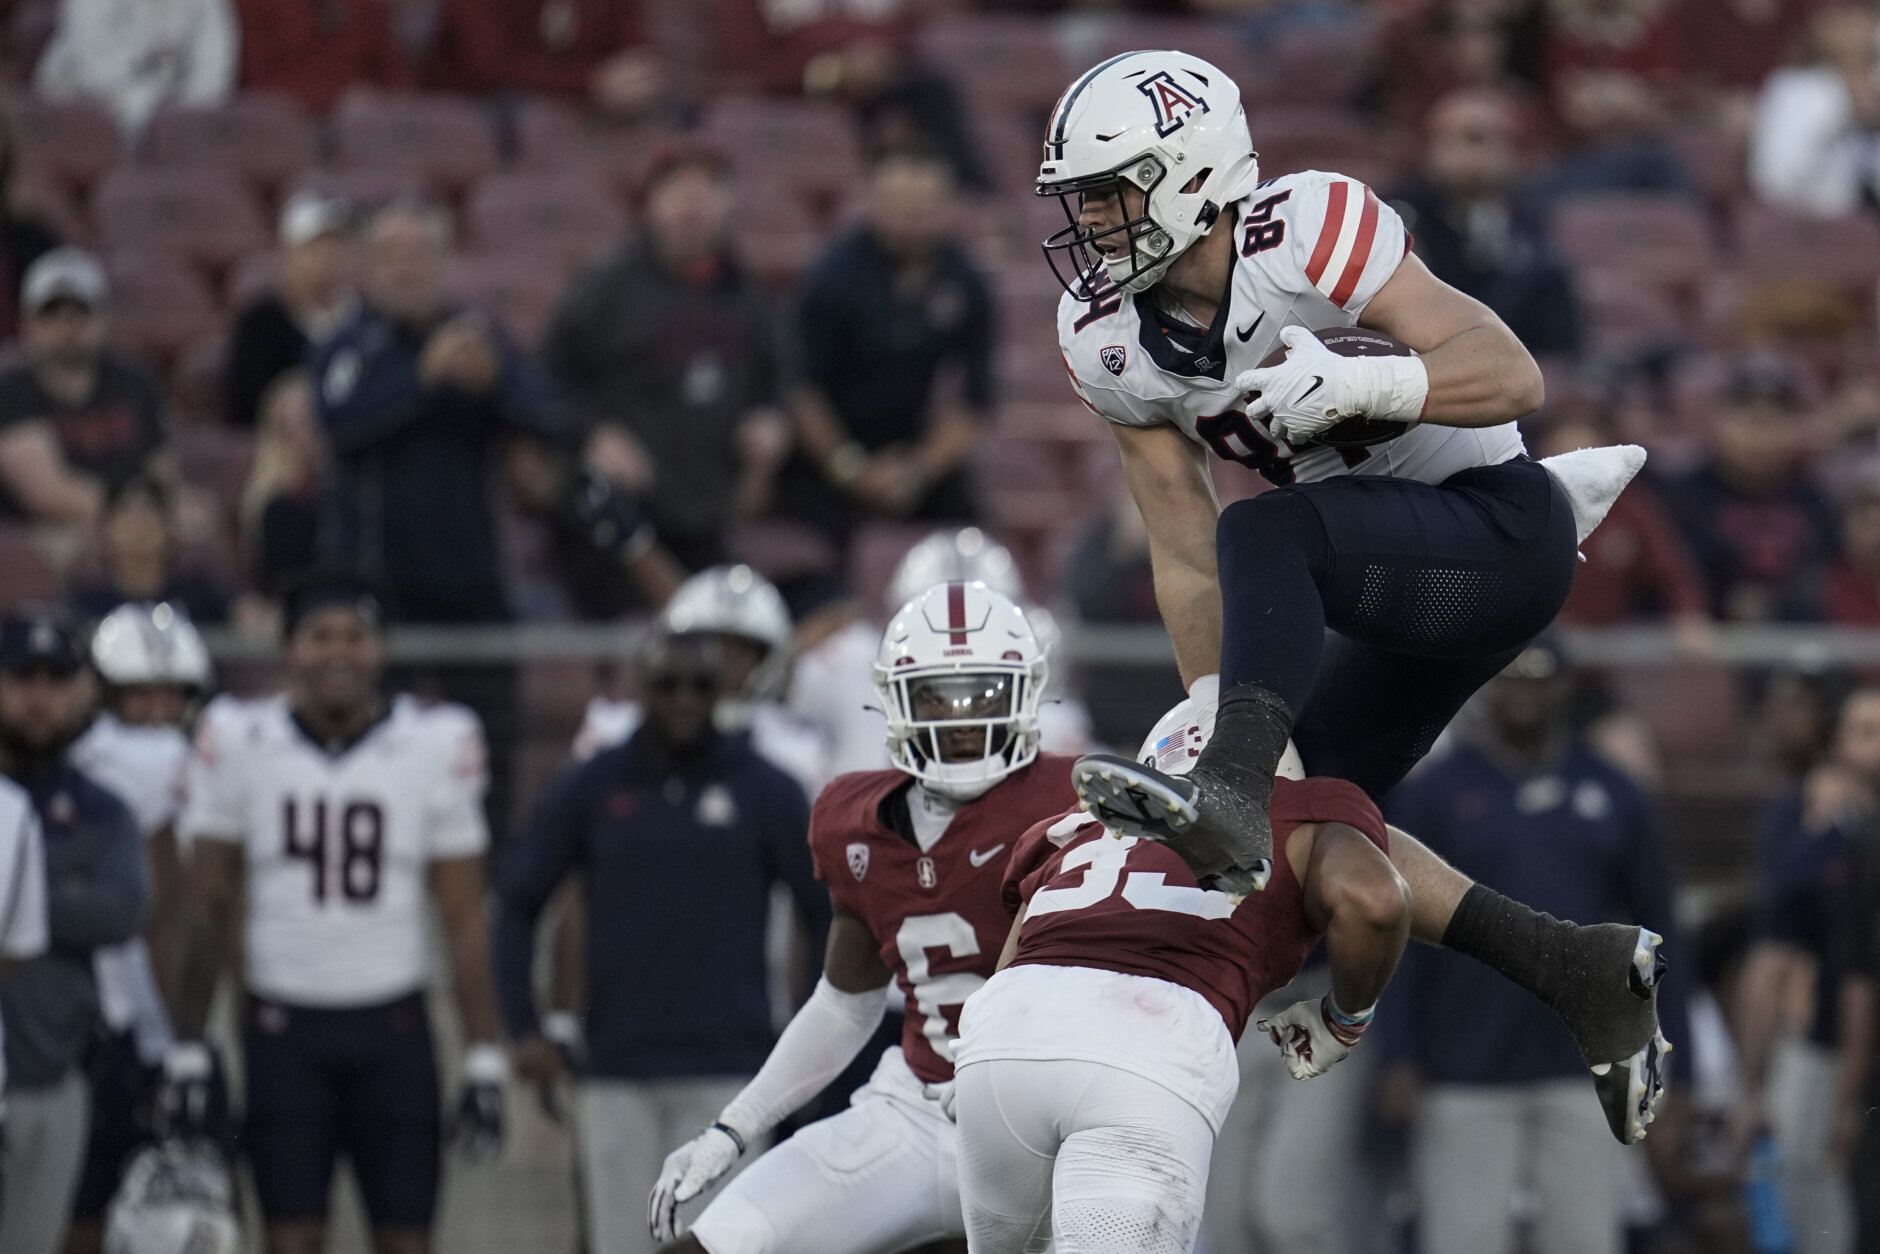 <h3>Round 5 (139th overall) — Tanner McLachlan, TE Arizona</h3>
<p>Again, at the risk of sounding hyperbolic, this could be Adam Peters&#8217; equivalent of San Francisco&#8217;s fifth round selection of George Kittle in 2017. McLachlan has the intangibles and high motor NFL teams crave, which could potentially outweigh some of the questions about his measurables. Guys like this just need a chance — and the Commanders&#8217; lackluster tight end depth chart will certainly give him that.</p>
